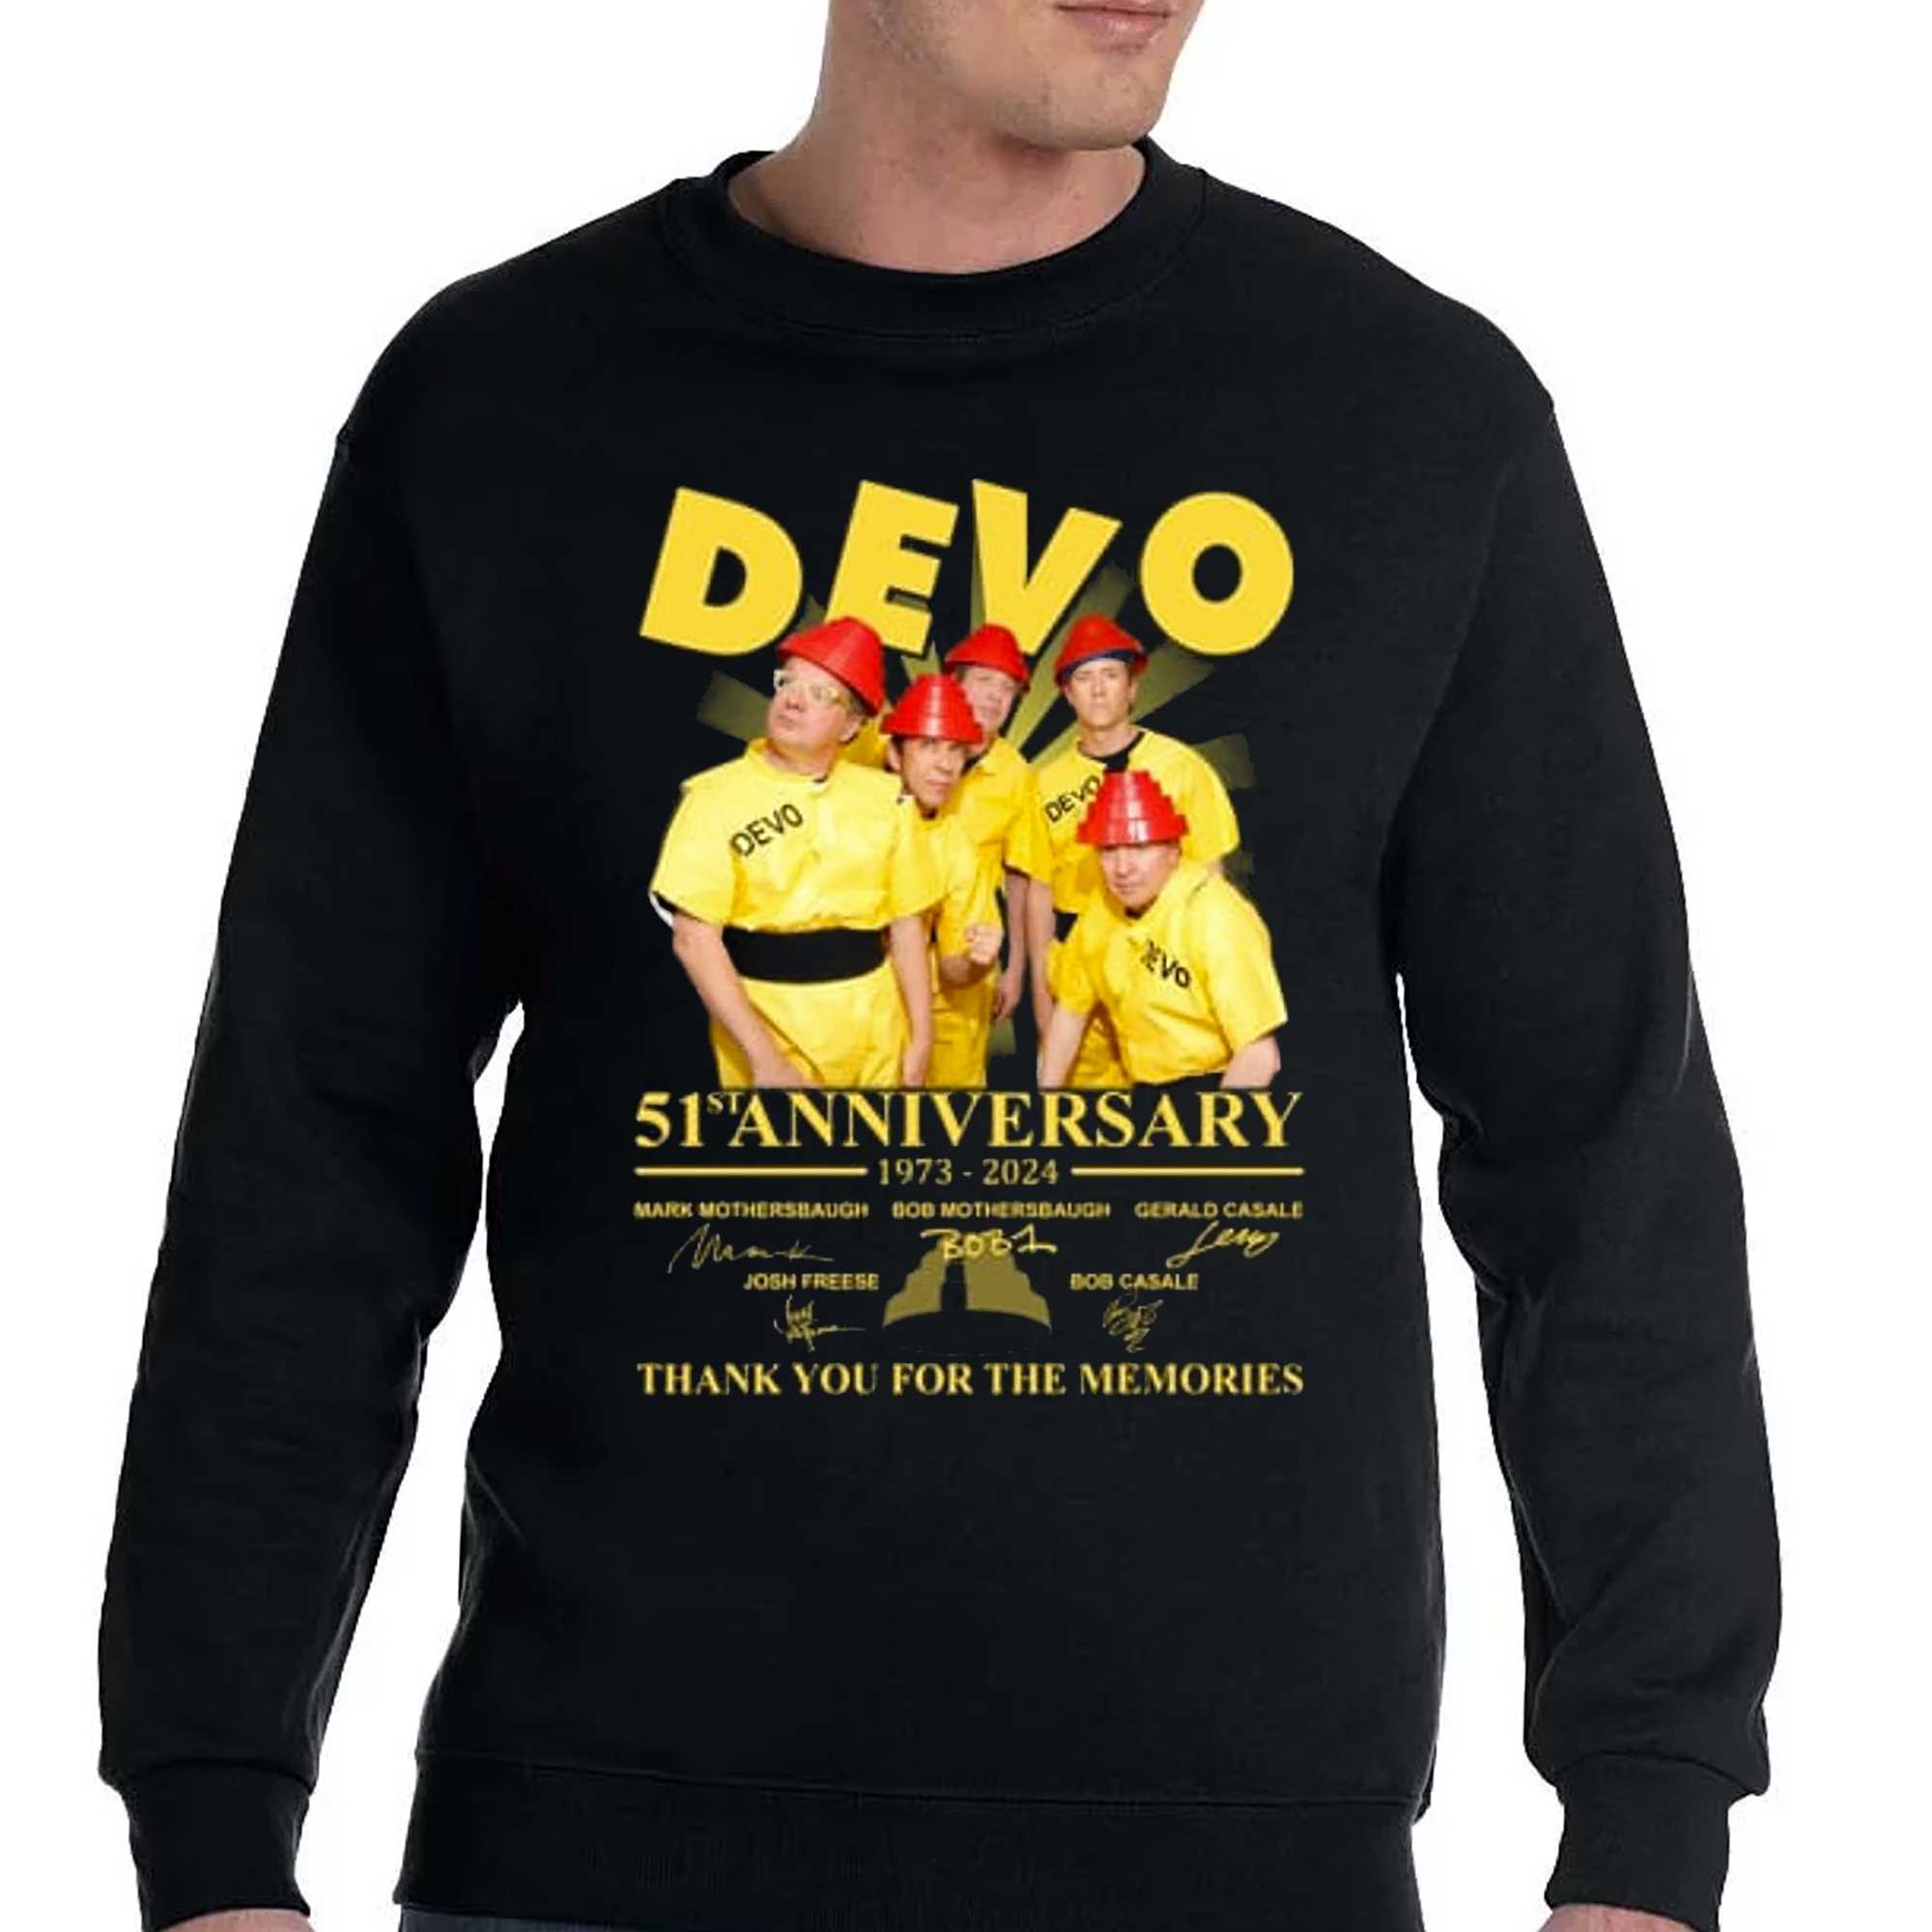 Devo Band 51st Anniversary 1973-2024 Thank You For The Memories T-shirt 